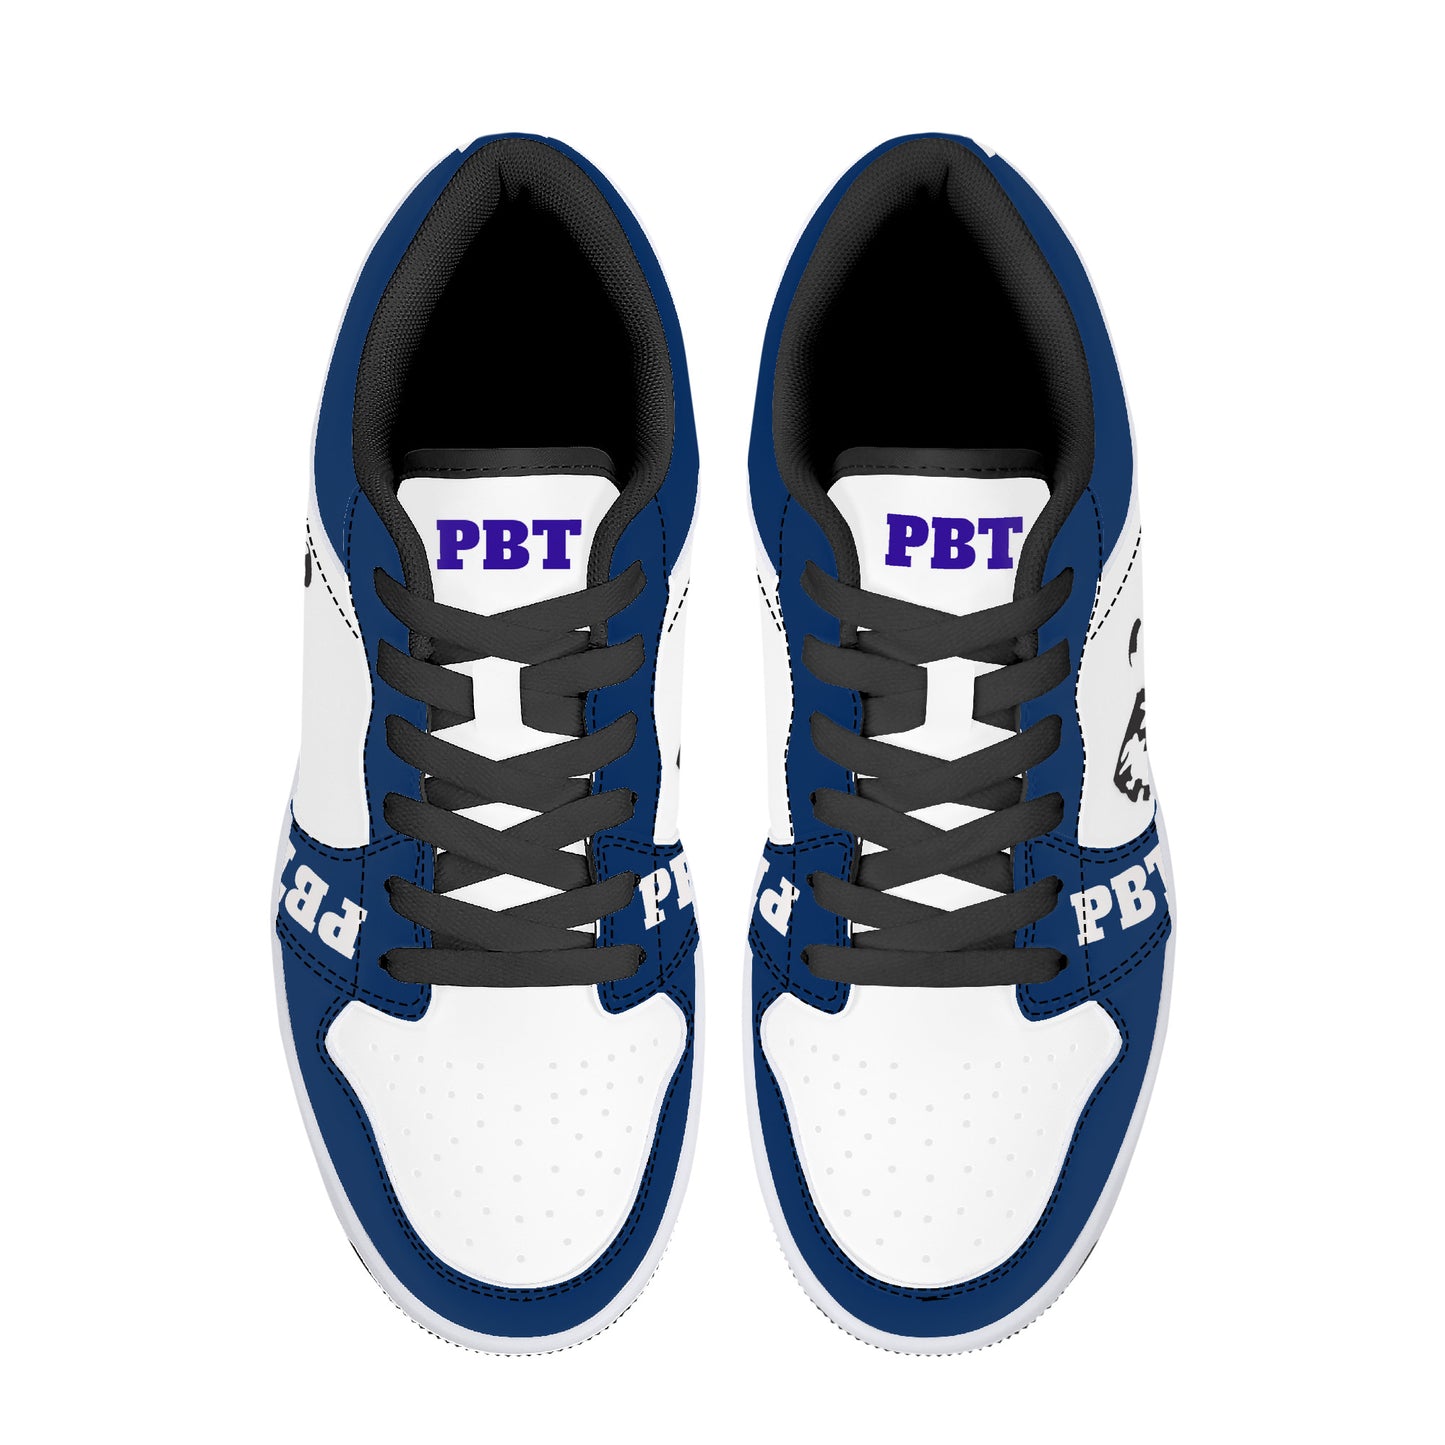 Legend Signaure Edition Leather Sneakers Available Only Through The PBT Website